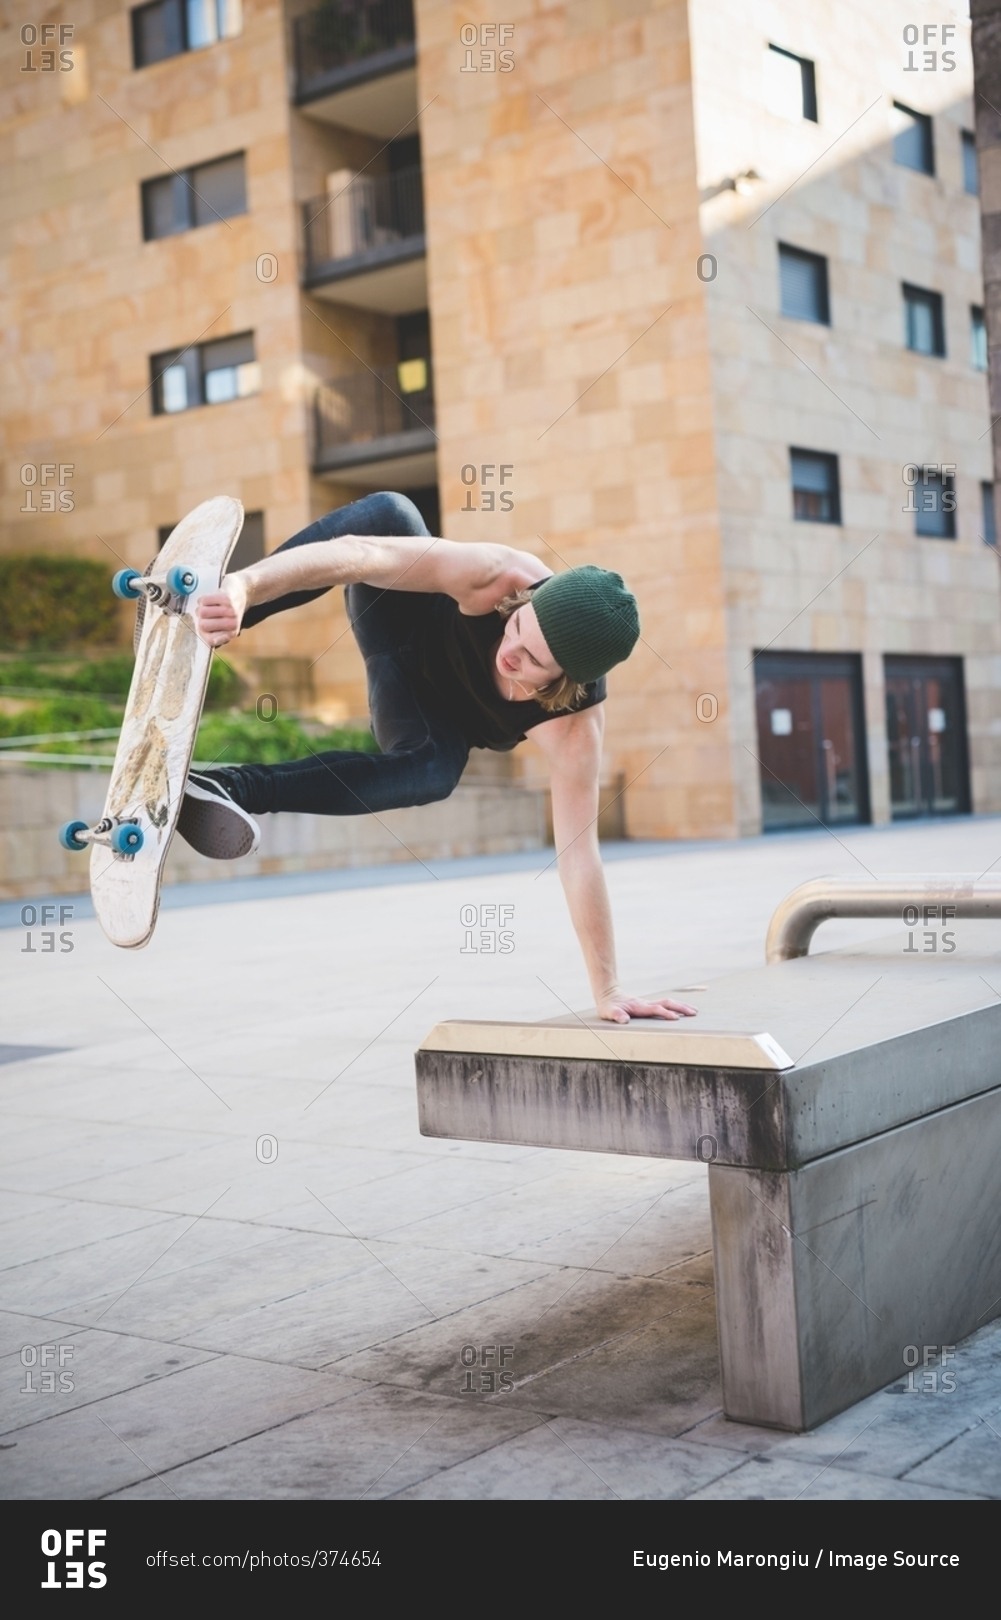 Young male skateboarder doing balance skateboard trick on urban concourse seat